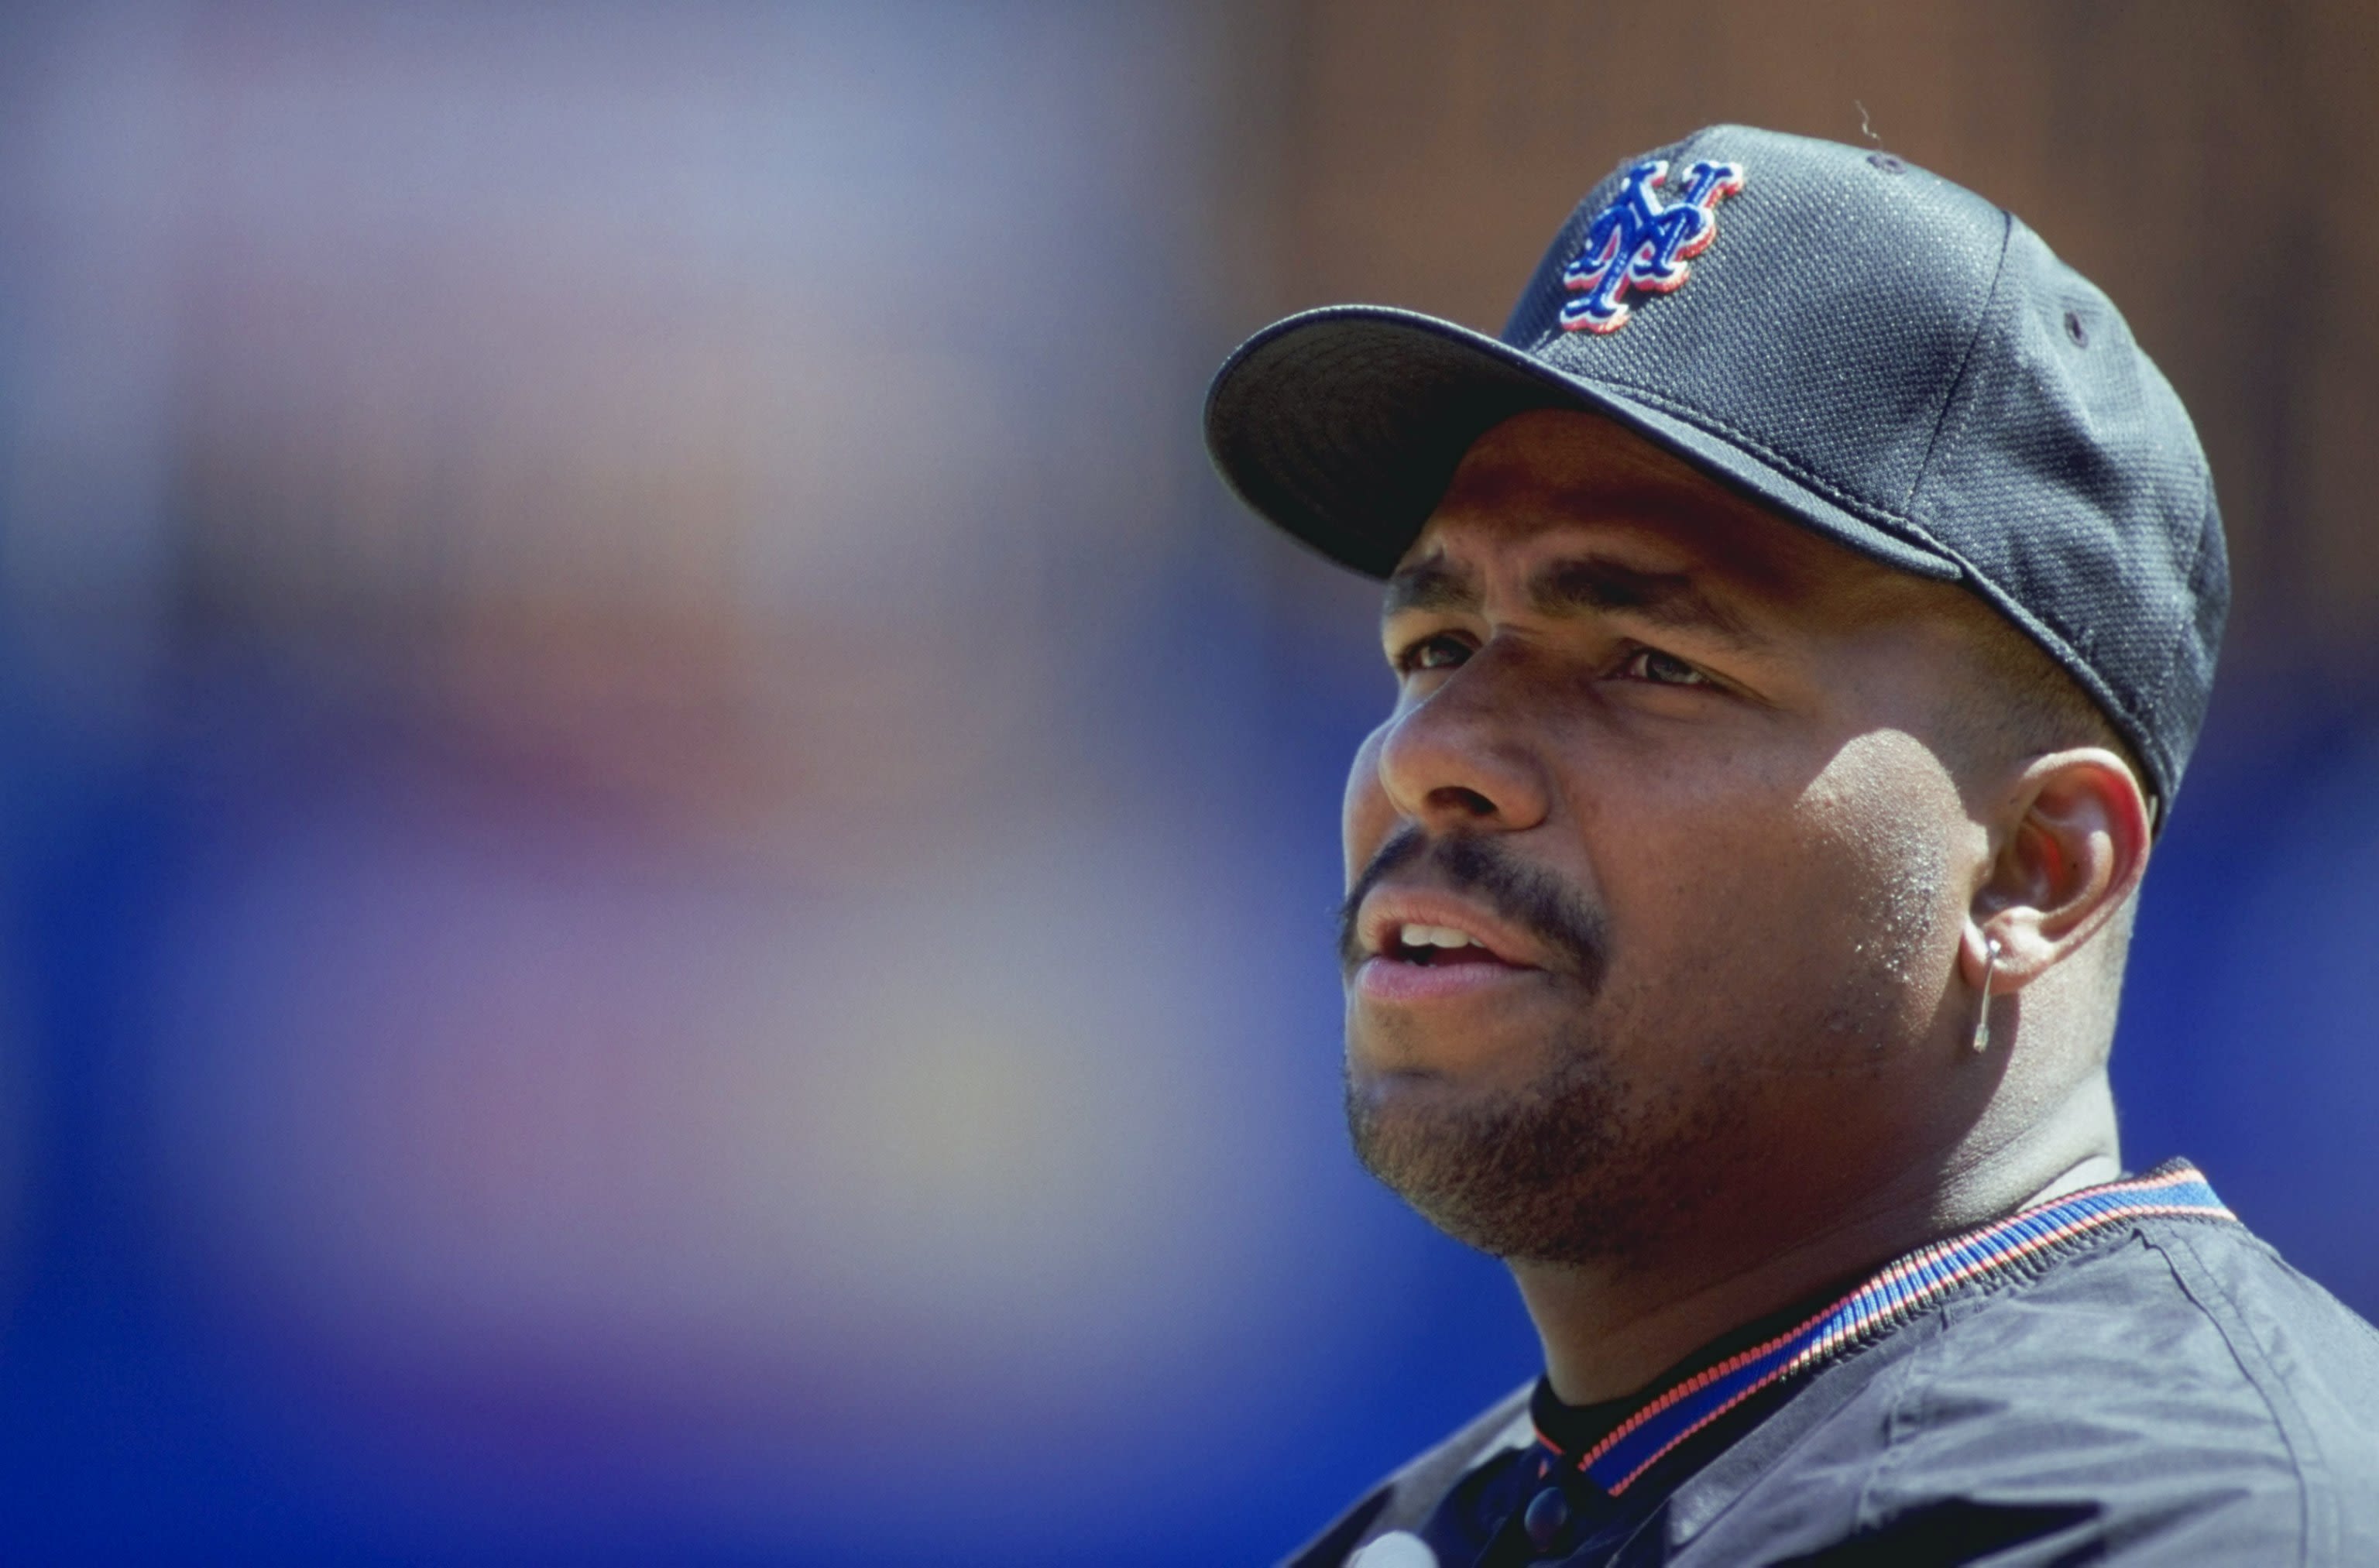 Bobby Bonilla Hasn't Played For Over 2 Decades. Why Do The Mets Still Pay  Him? - Financial Freedom Countdown